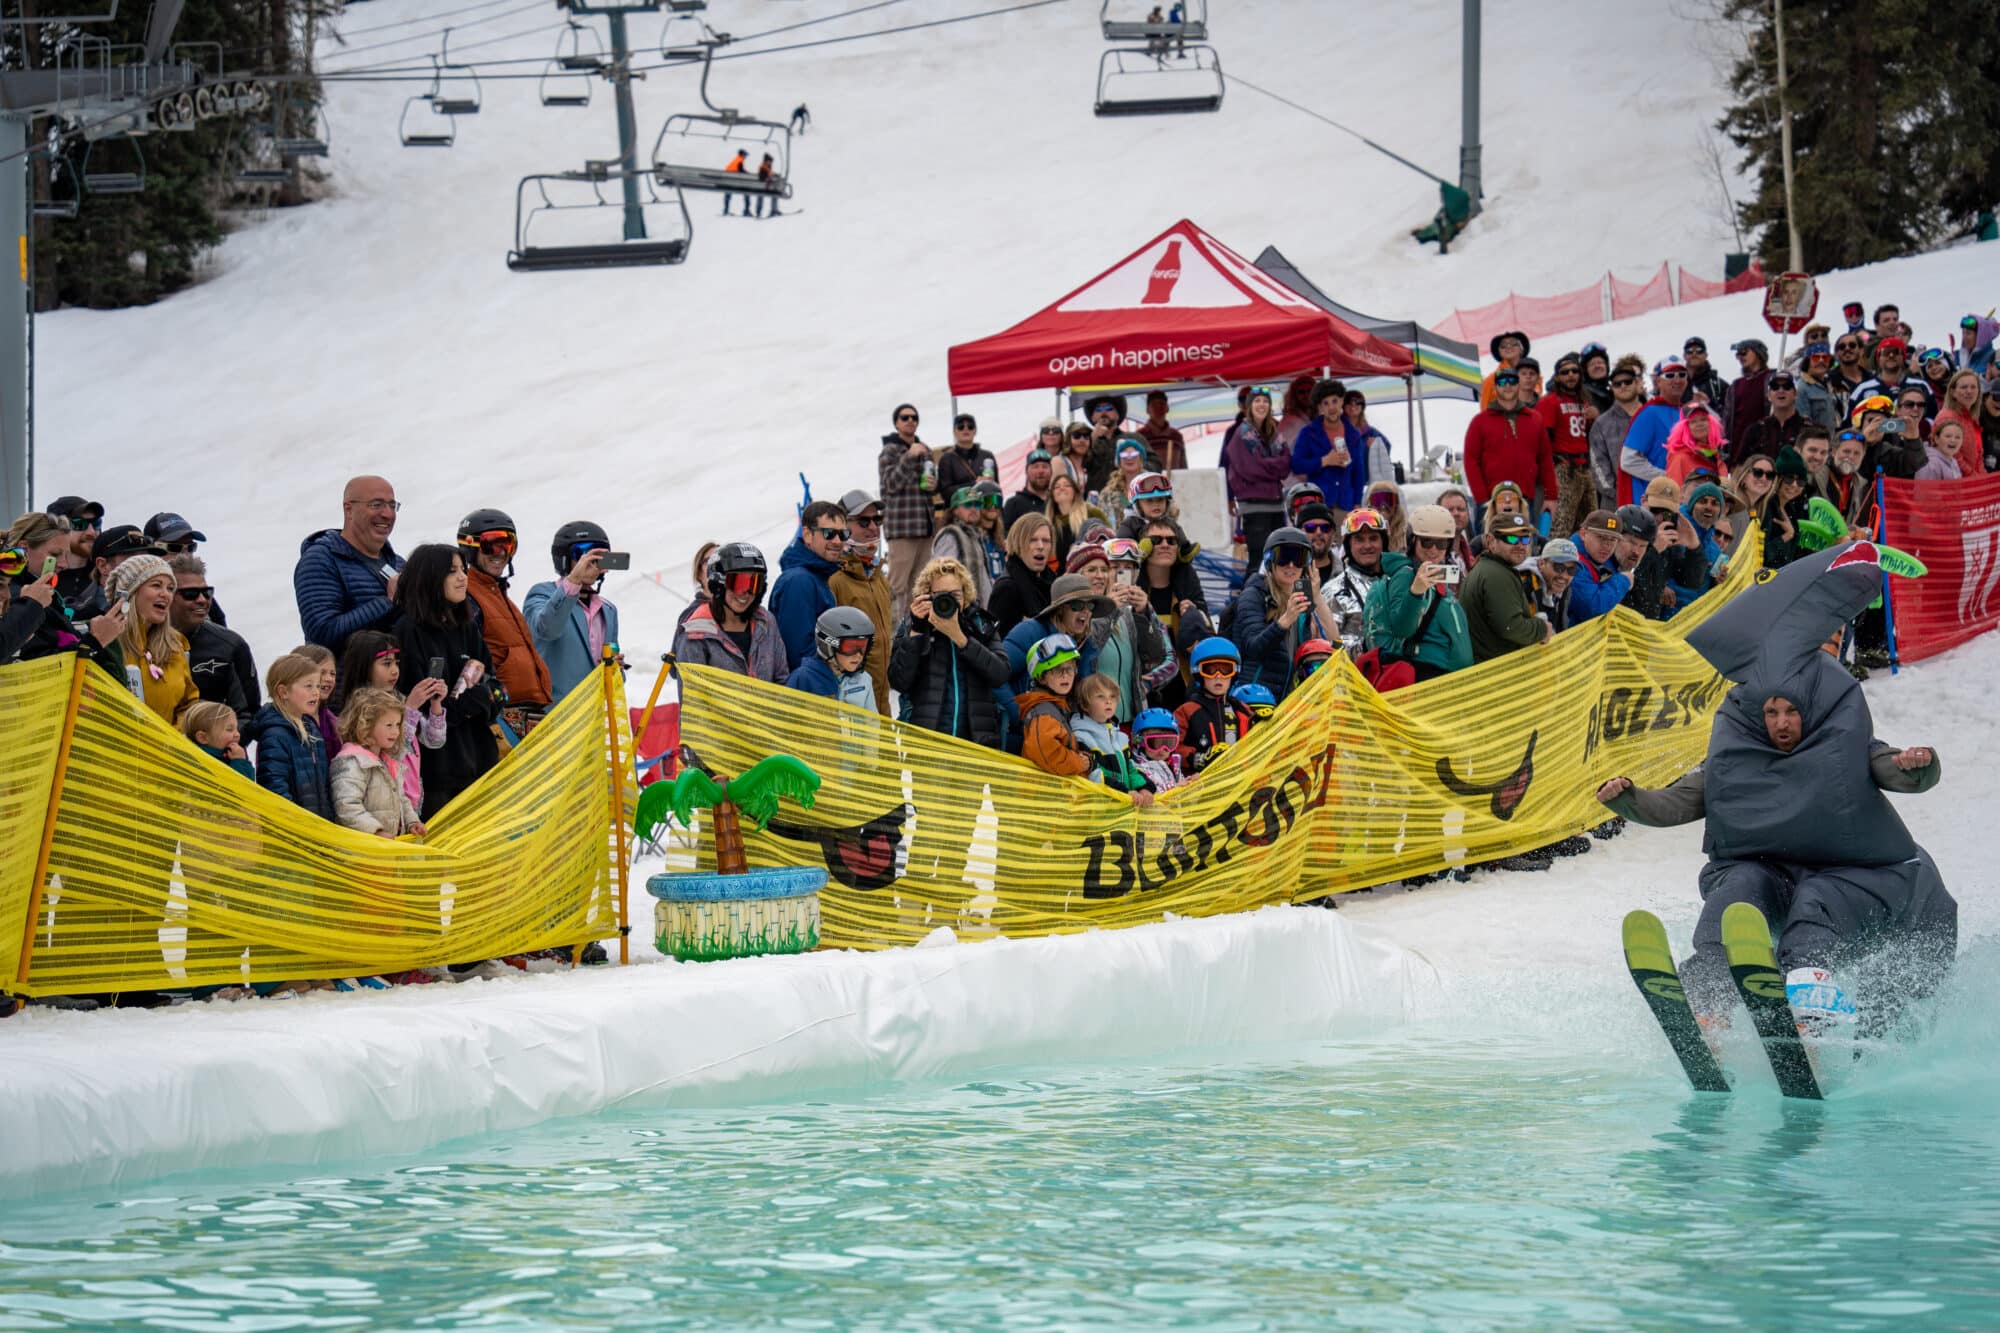 Skiers in a dinosaur costume glides across the pond skim